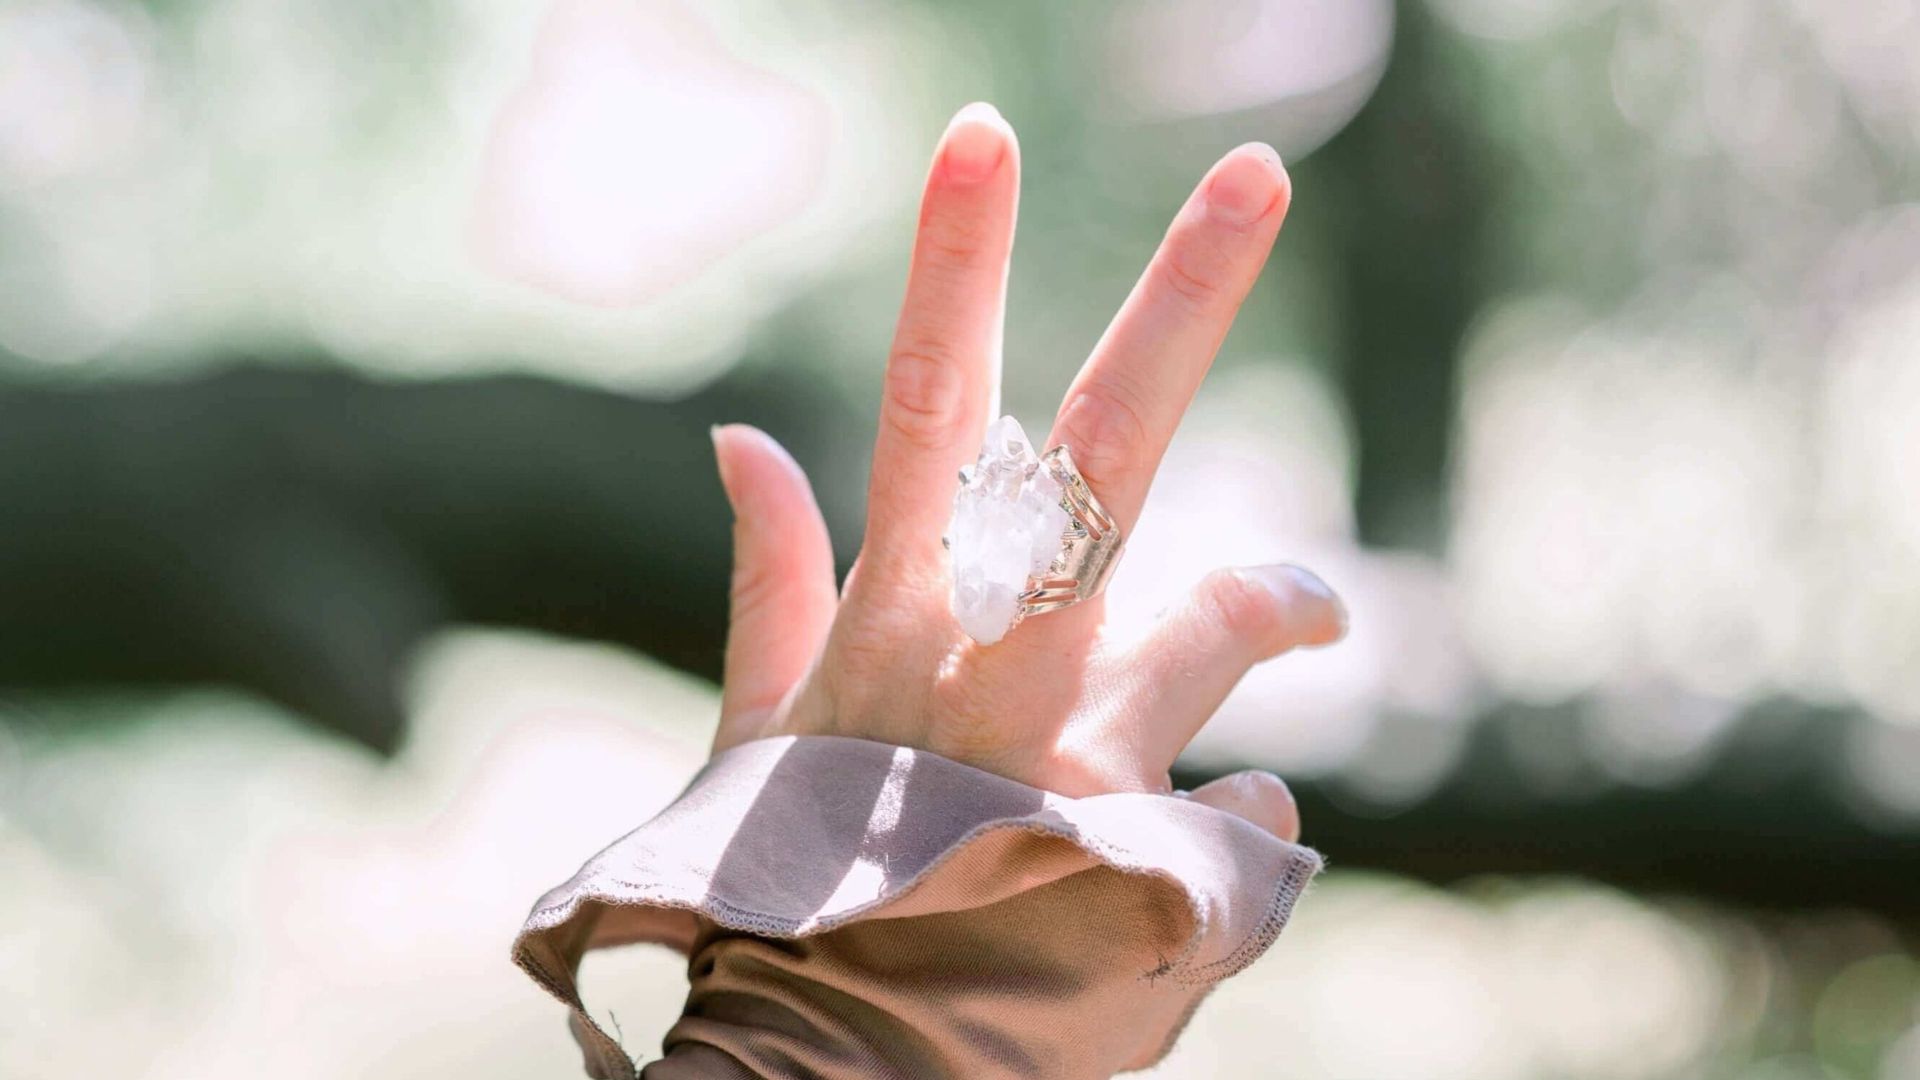 A woman's hand holding a quartz crystal. She's outside in a park or grassy area.